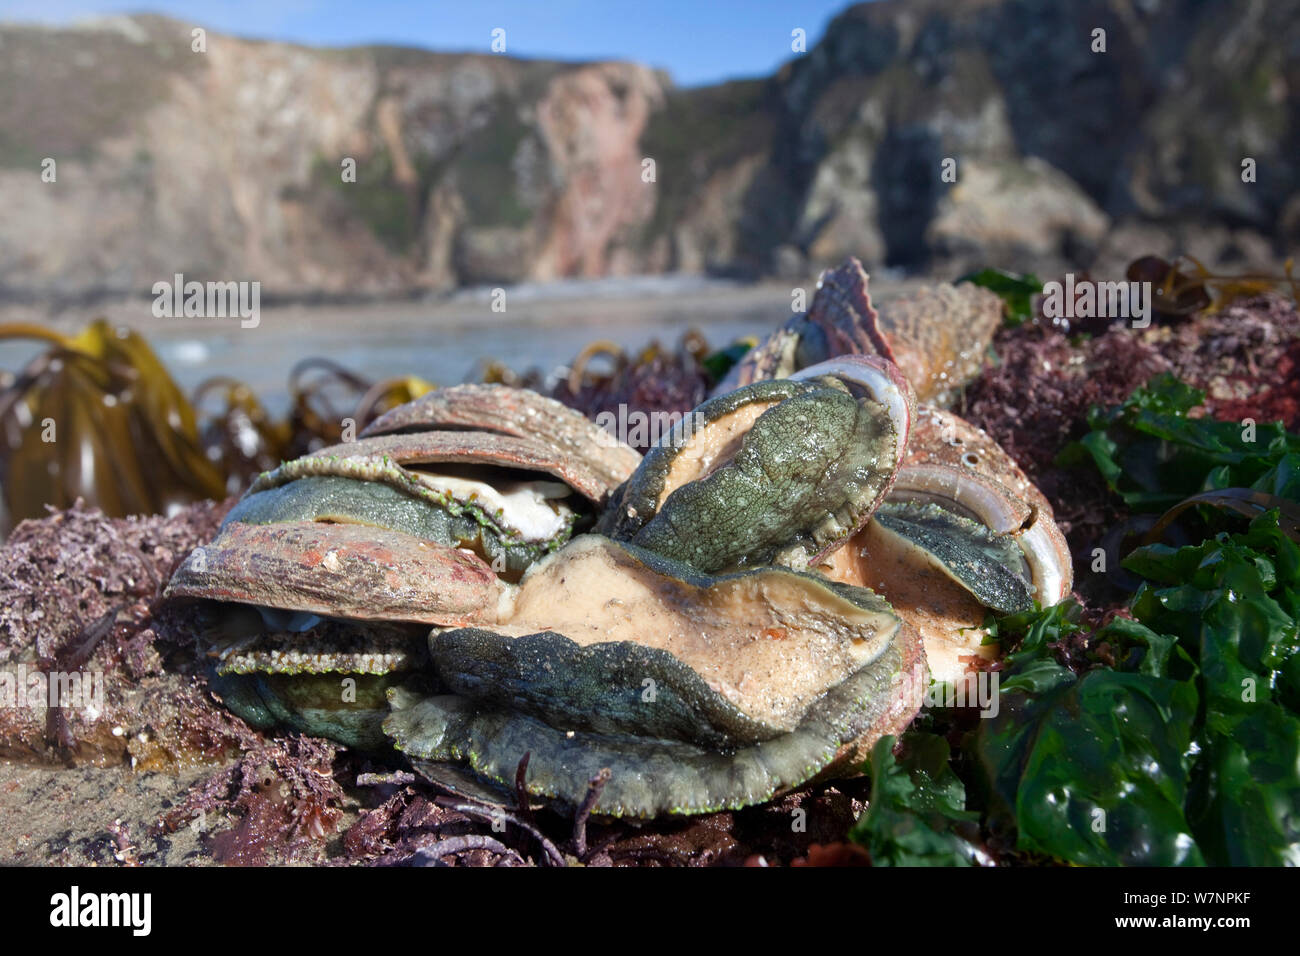 Ormers (Haliotis tuberculata) exposed at low tide, English Channel, off the coast of Sark, Channel Islands, March Stock Photo